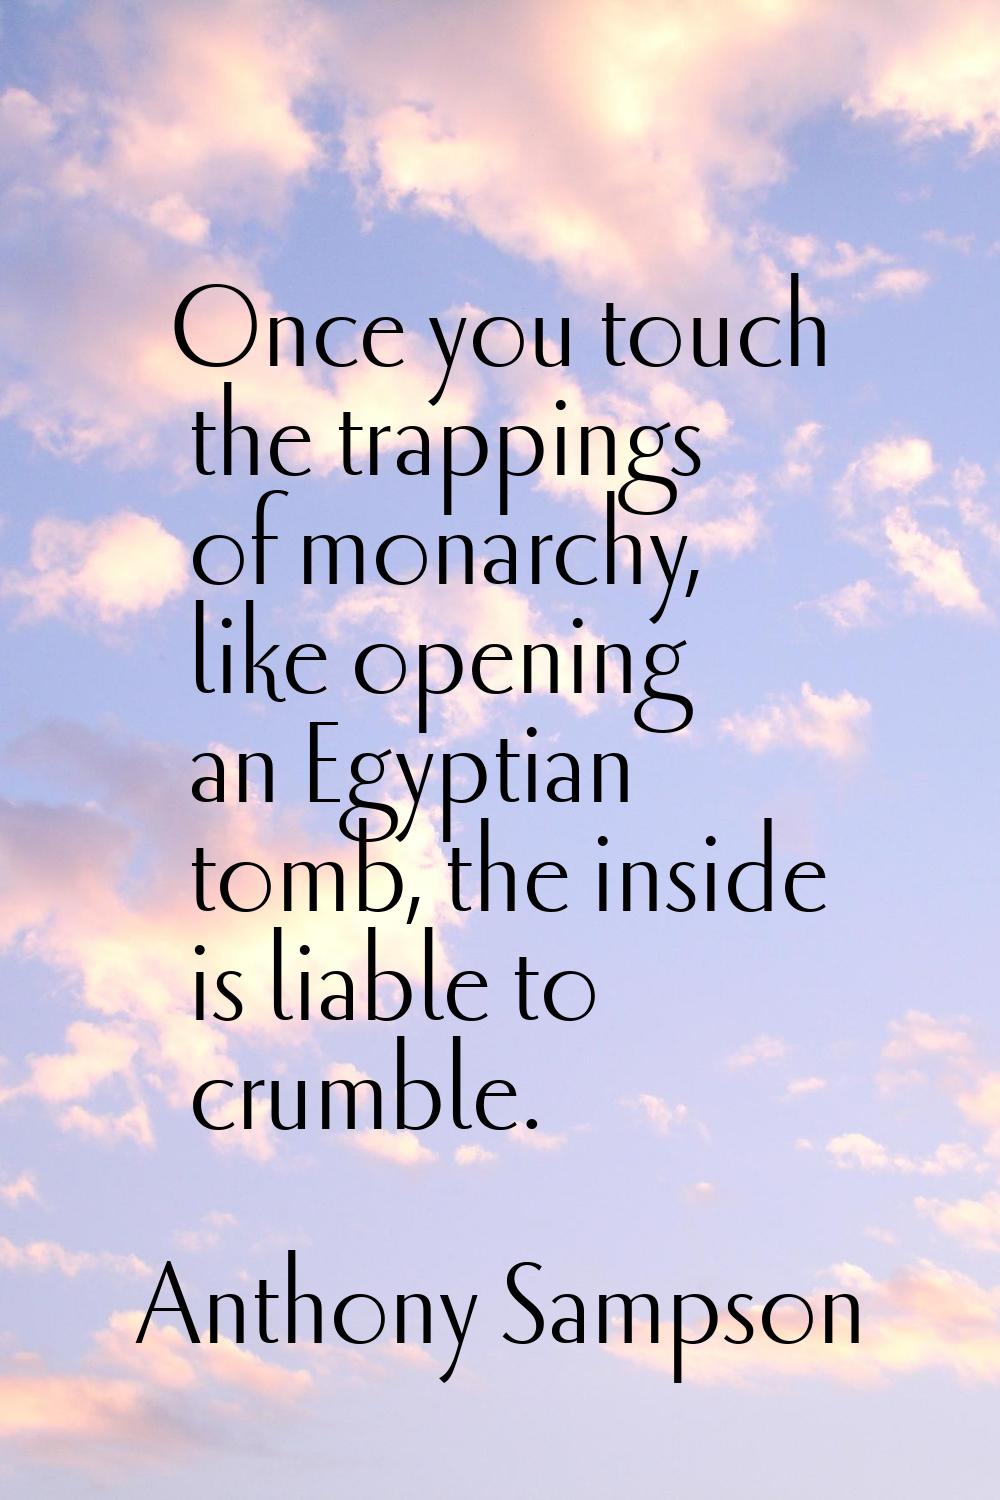 Once you touch the trappings of monarchy, like opening an Egyptian tomb, the inside is liable to cr